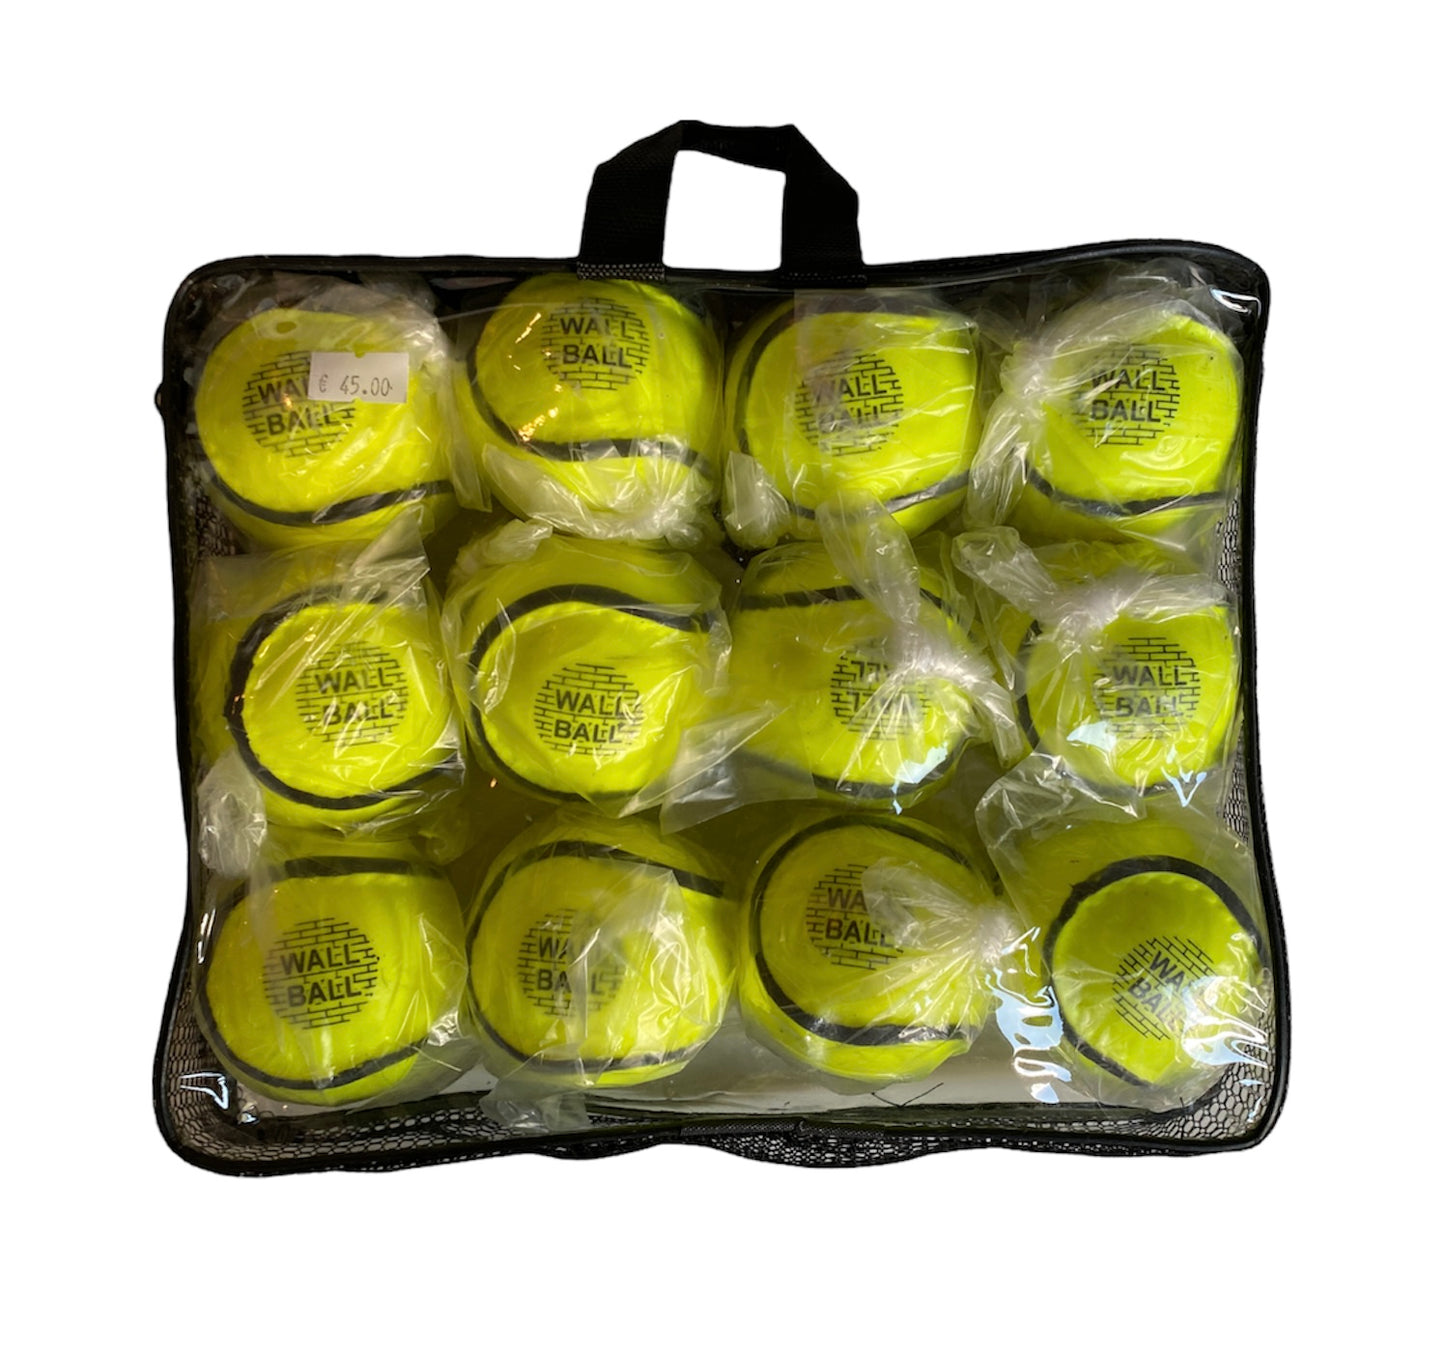 PREMIER SPORTS - WALL BALL YELLOW (SIZE 5) Bag of 12